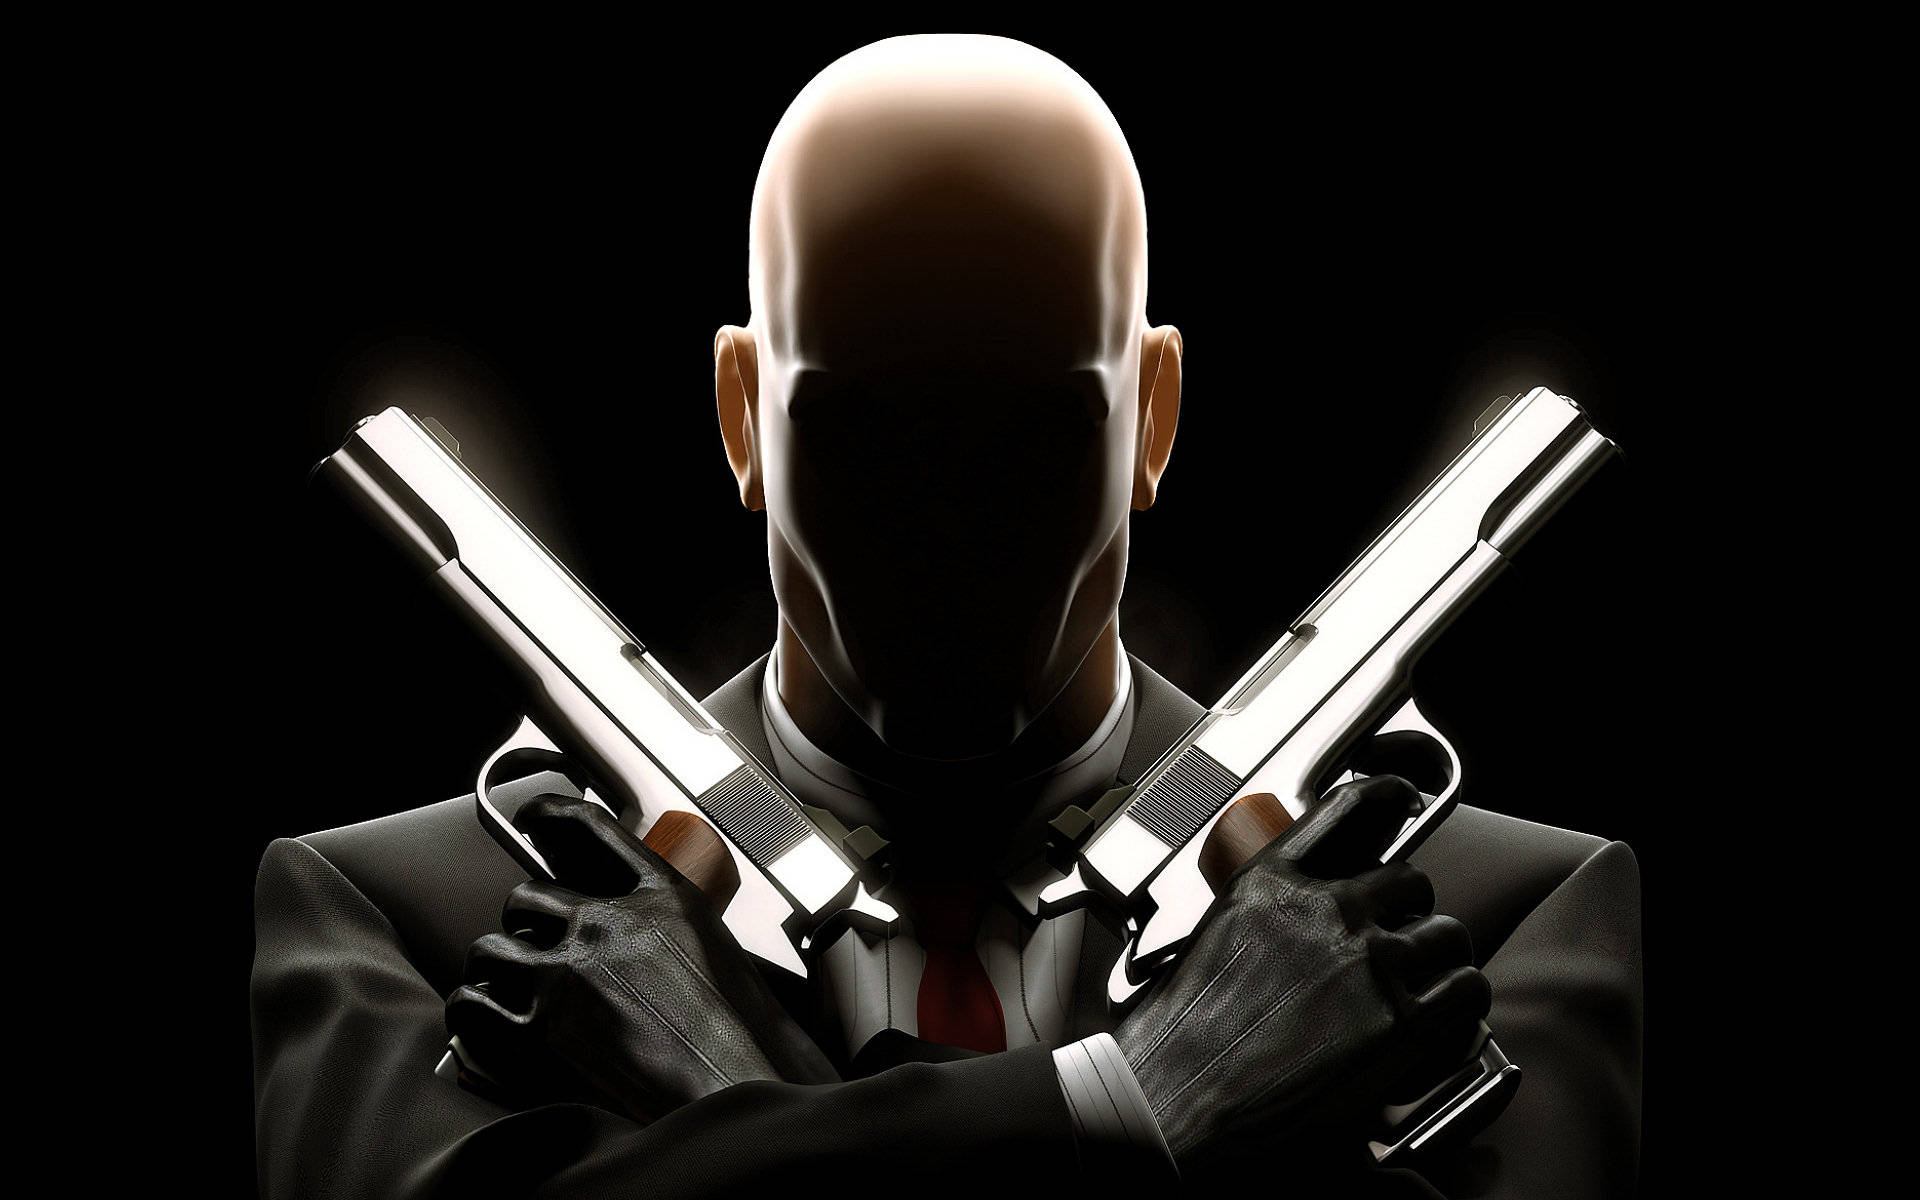 Hitman Shadowy Face Background